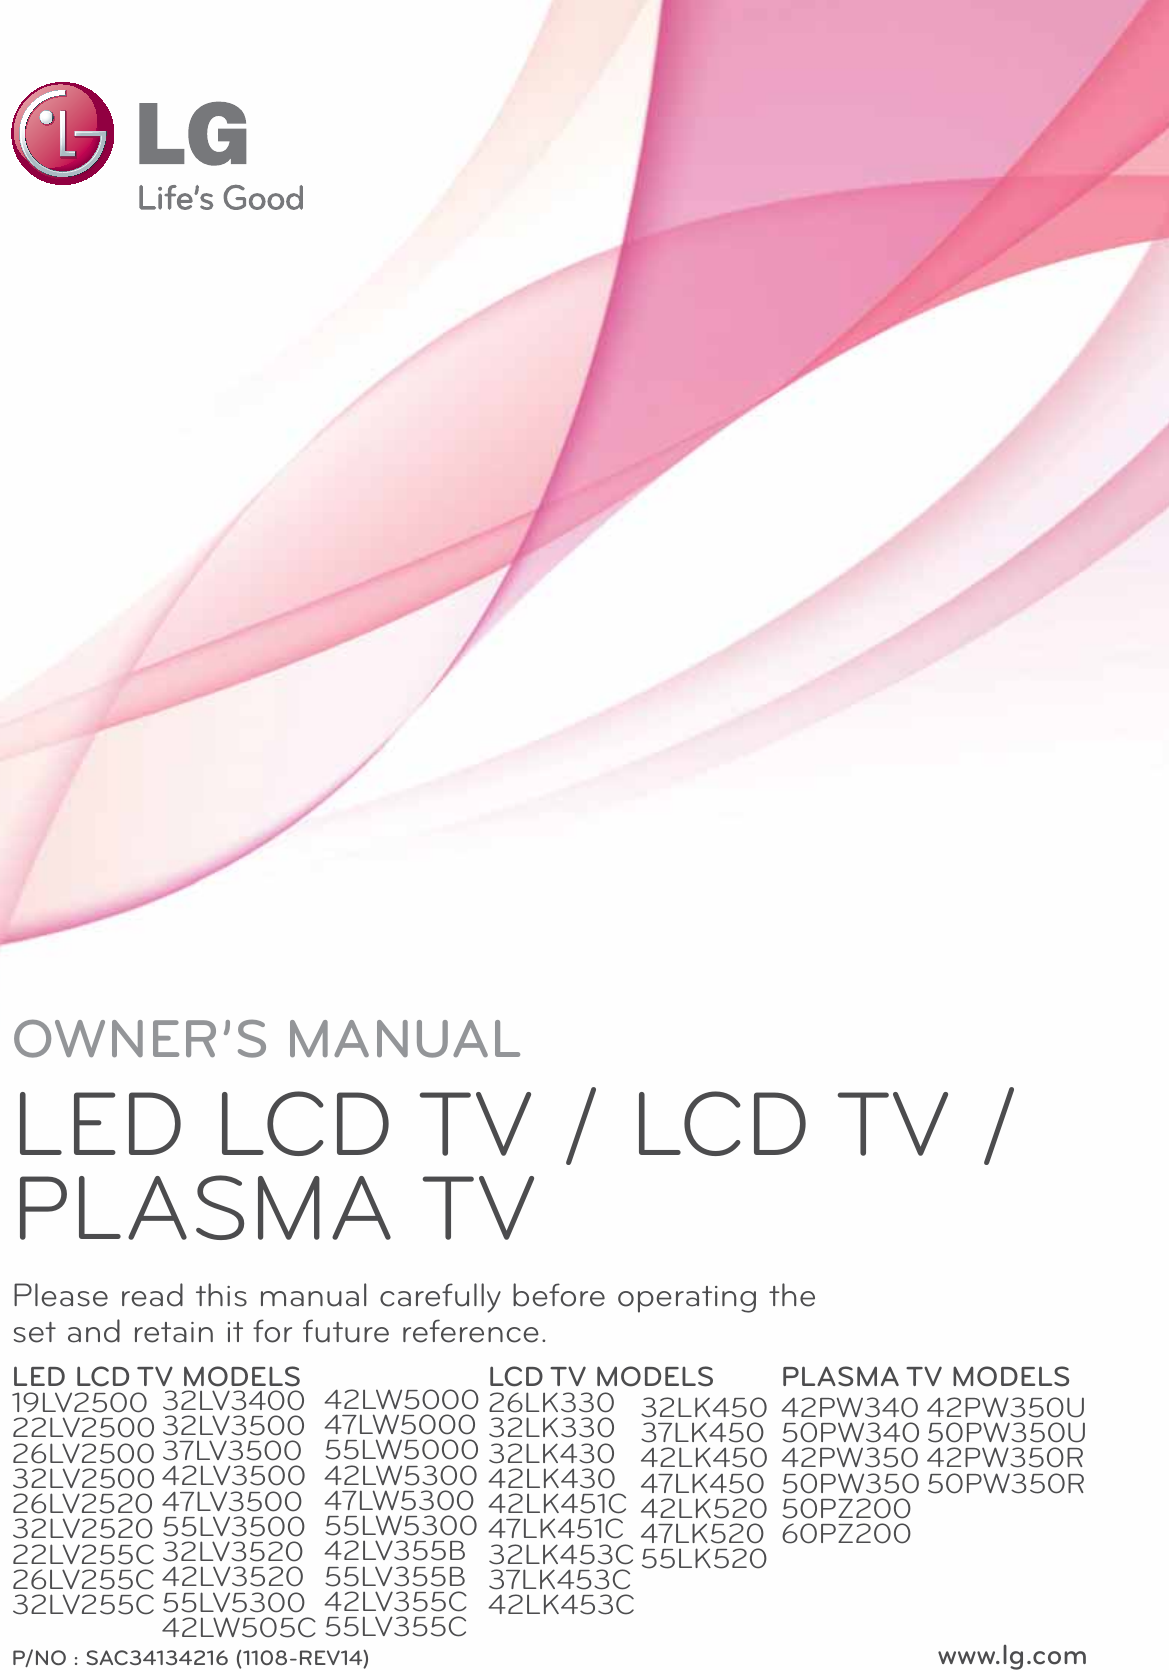 www.lg.comP/NO : SAC34134216 (1108-REV14)OWNER’S MANUALLED LCD TV / LCD TV / PLASMA TVPlease read this manual carefully before operating the set and retain it for future reference.LED LCD TV MODELS19LV250022LV250026LV250032LV250026LV252032LV252022LV255C26LV255C32LV255CLCD TV MODELS26LK33032LK33032LK43042LK43042LK451C47LK451C32LK453C37LK453C42LK453CPLASMA TV MODELS42PW34050PW34042PW35050PW35050PZ20060PZ20032LV340032LV350037LV350042LV350047LV350055LV350032LV352042LV352055LV530042LW505C32LK45037LK45042LK45047LK45042LK52047LK52055LK52042PW350U50PW350U42PW350R50PW350R42LW500047LW500055LW500042LW530047LW530055LW530042LV355B55LV355B42LV355C55LV355C